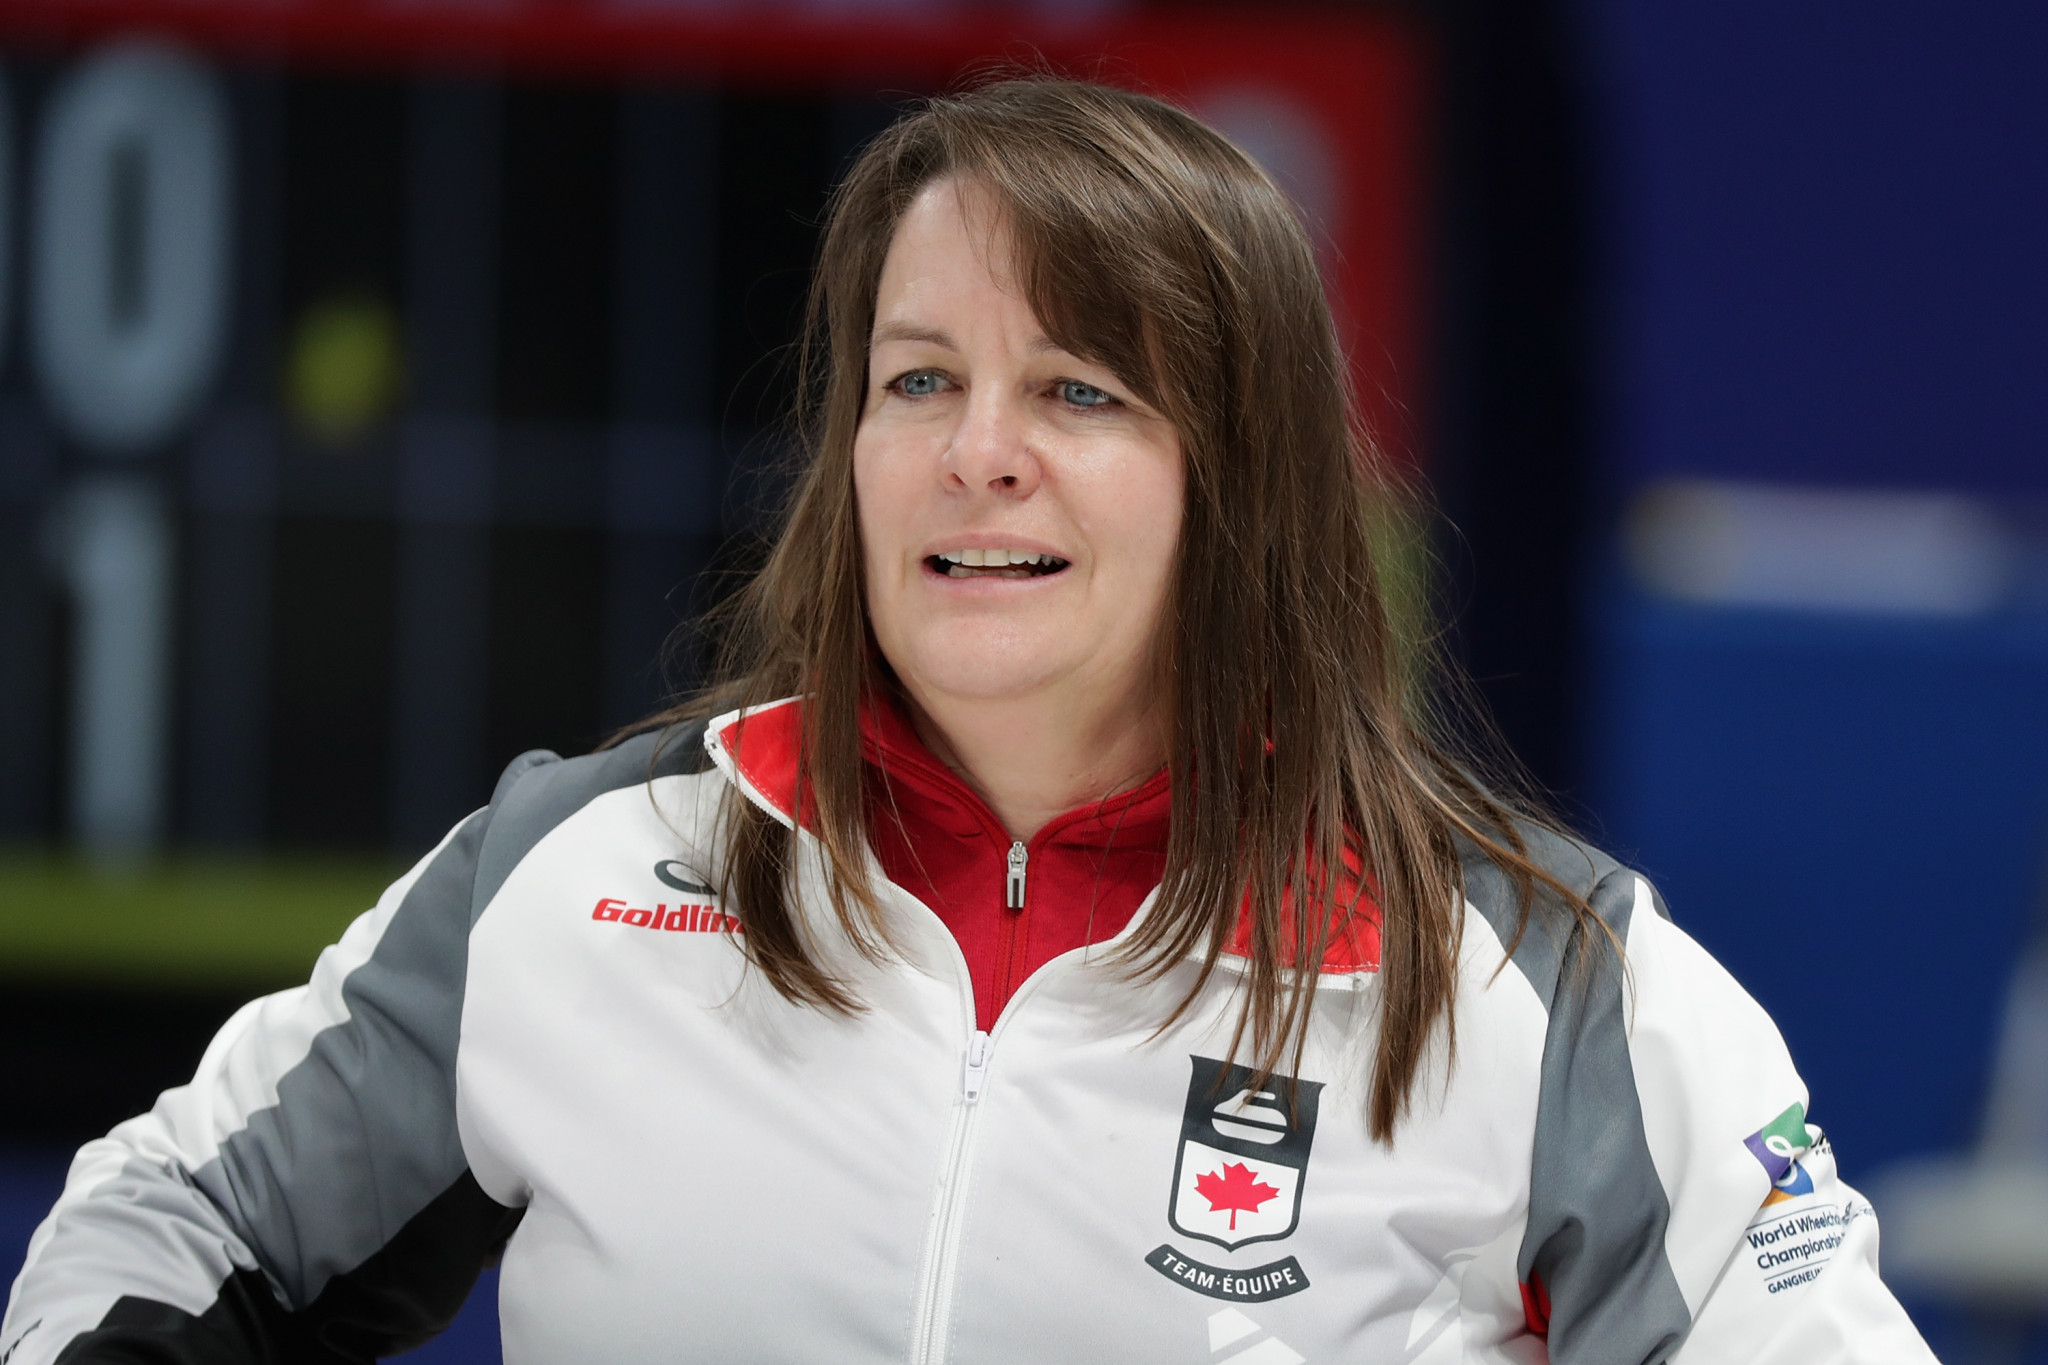 Forrest and Whitehead elected to Canadian Paralympic Athletes’ Council